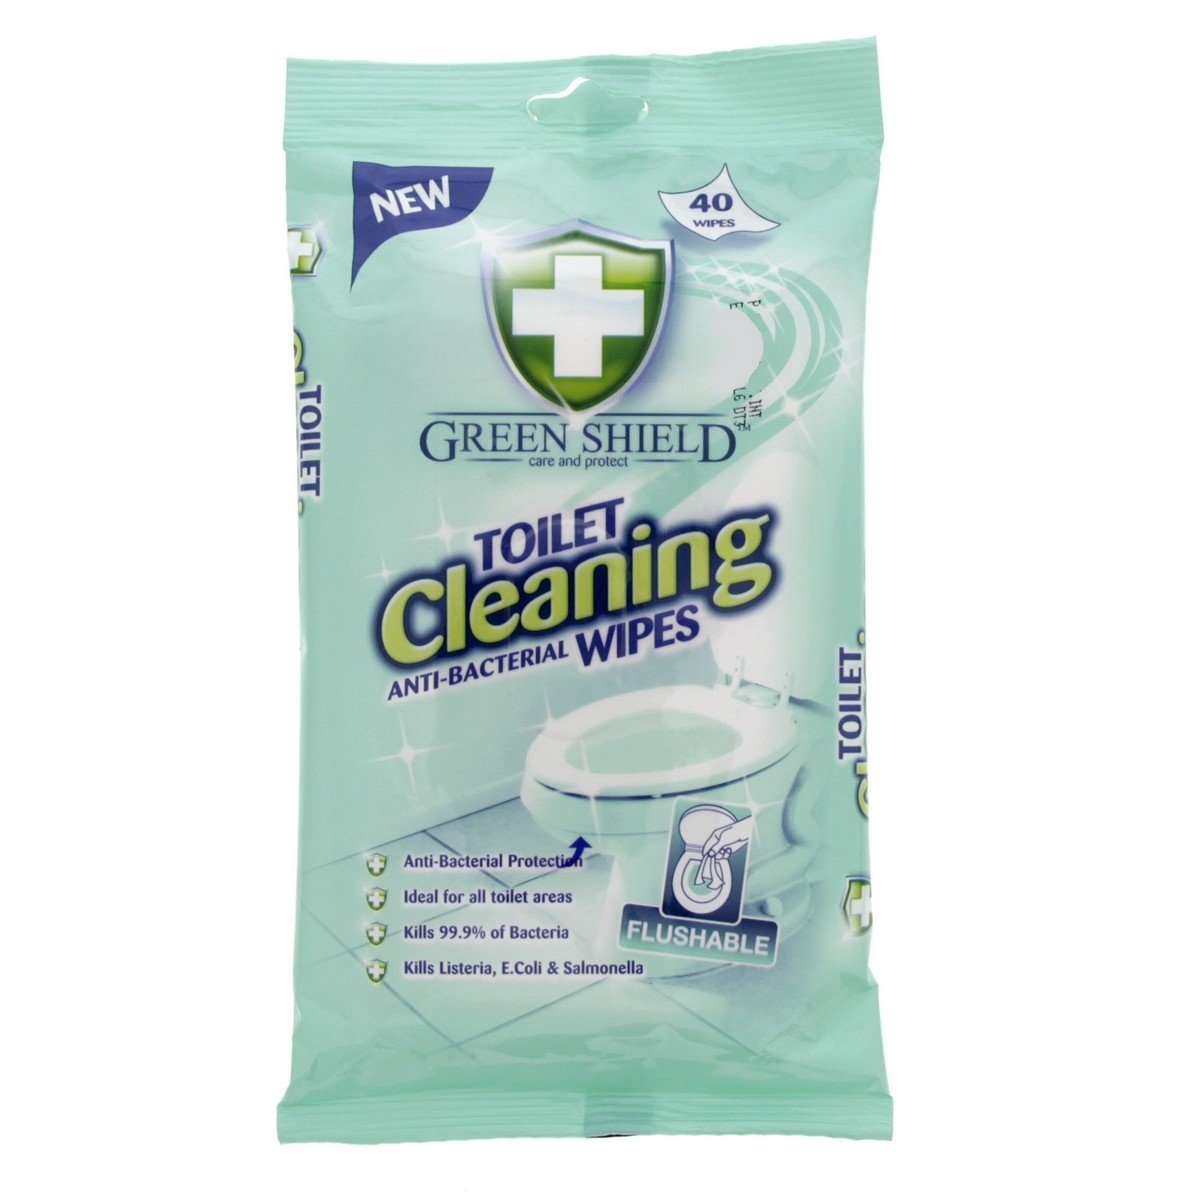 Green Shield Toilet Cleaning Anti Bacterial Wipes 40pcs